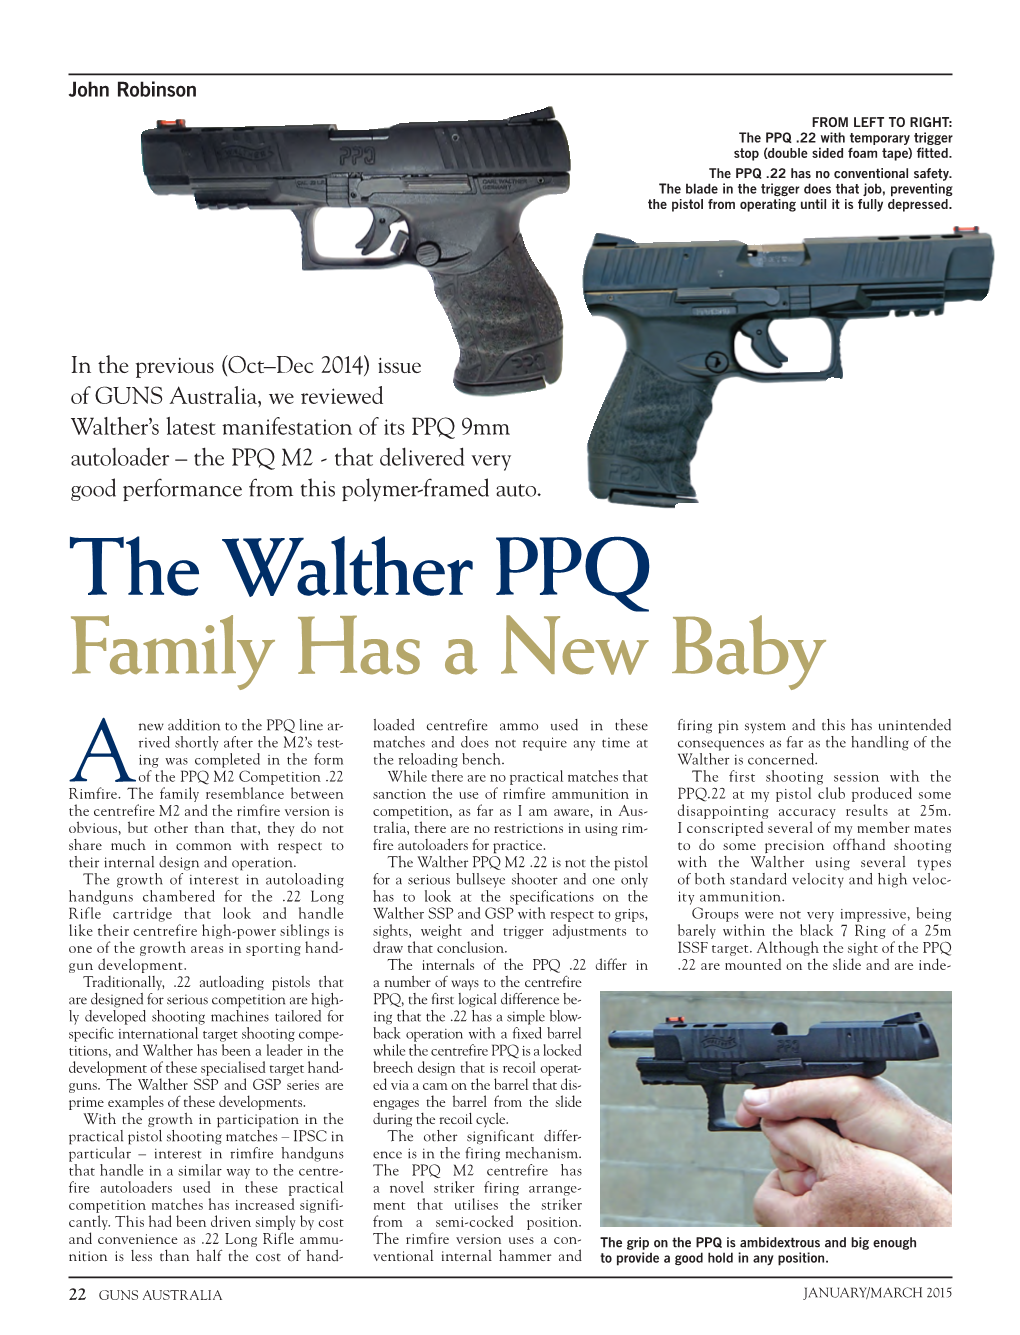 The Walther PPQ Family Has a New Baby